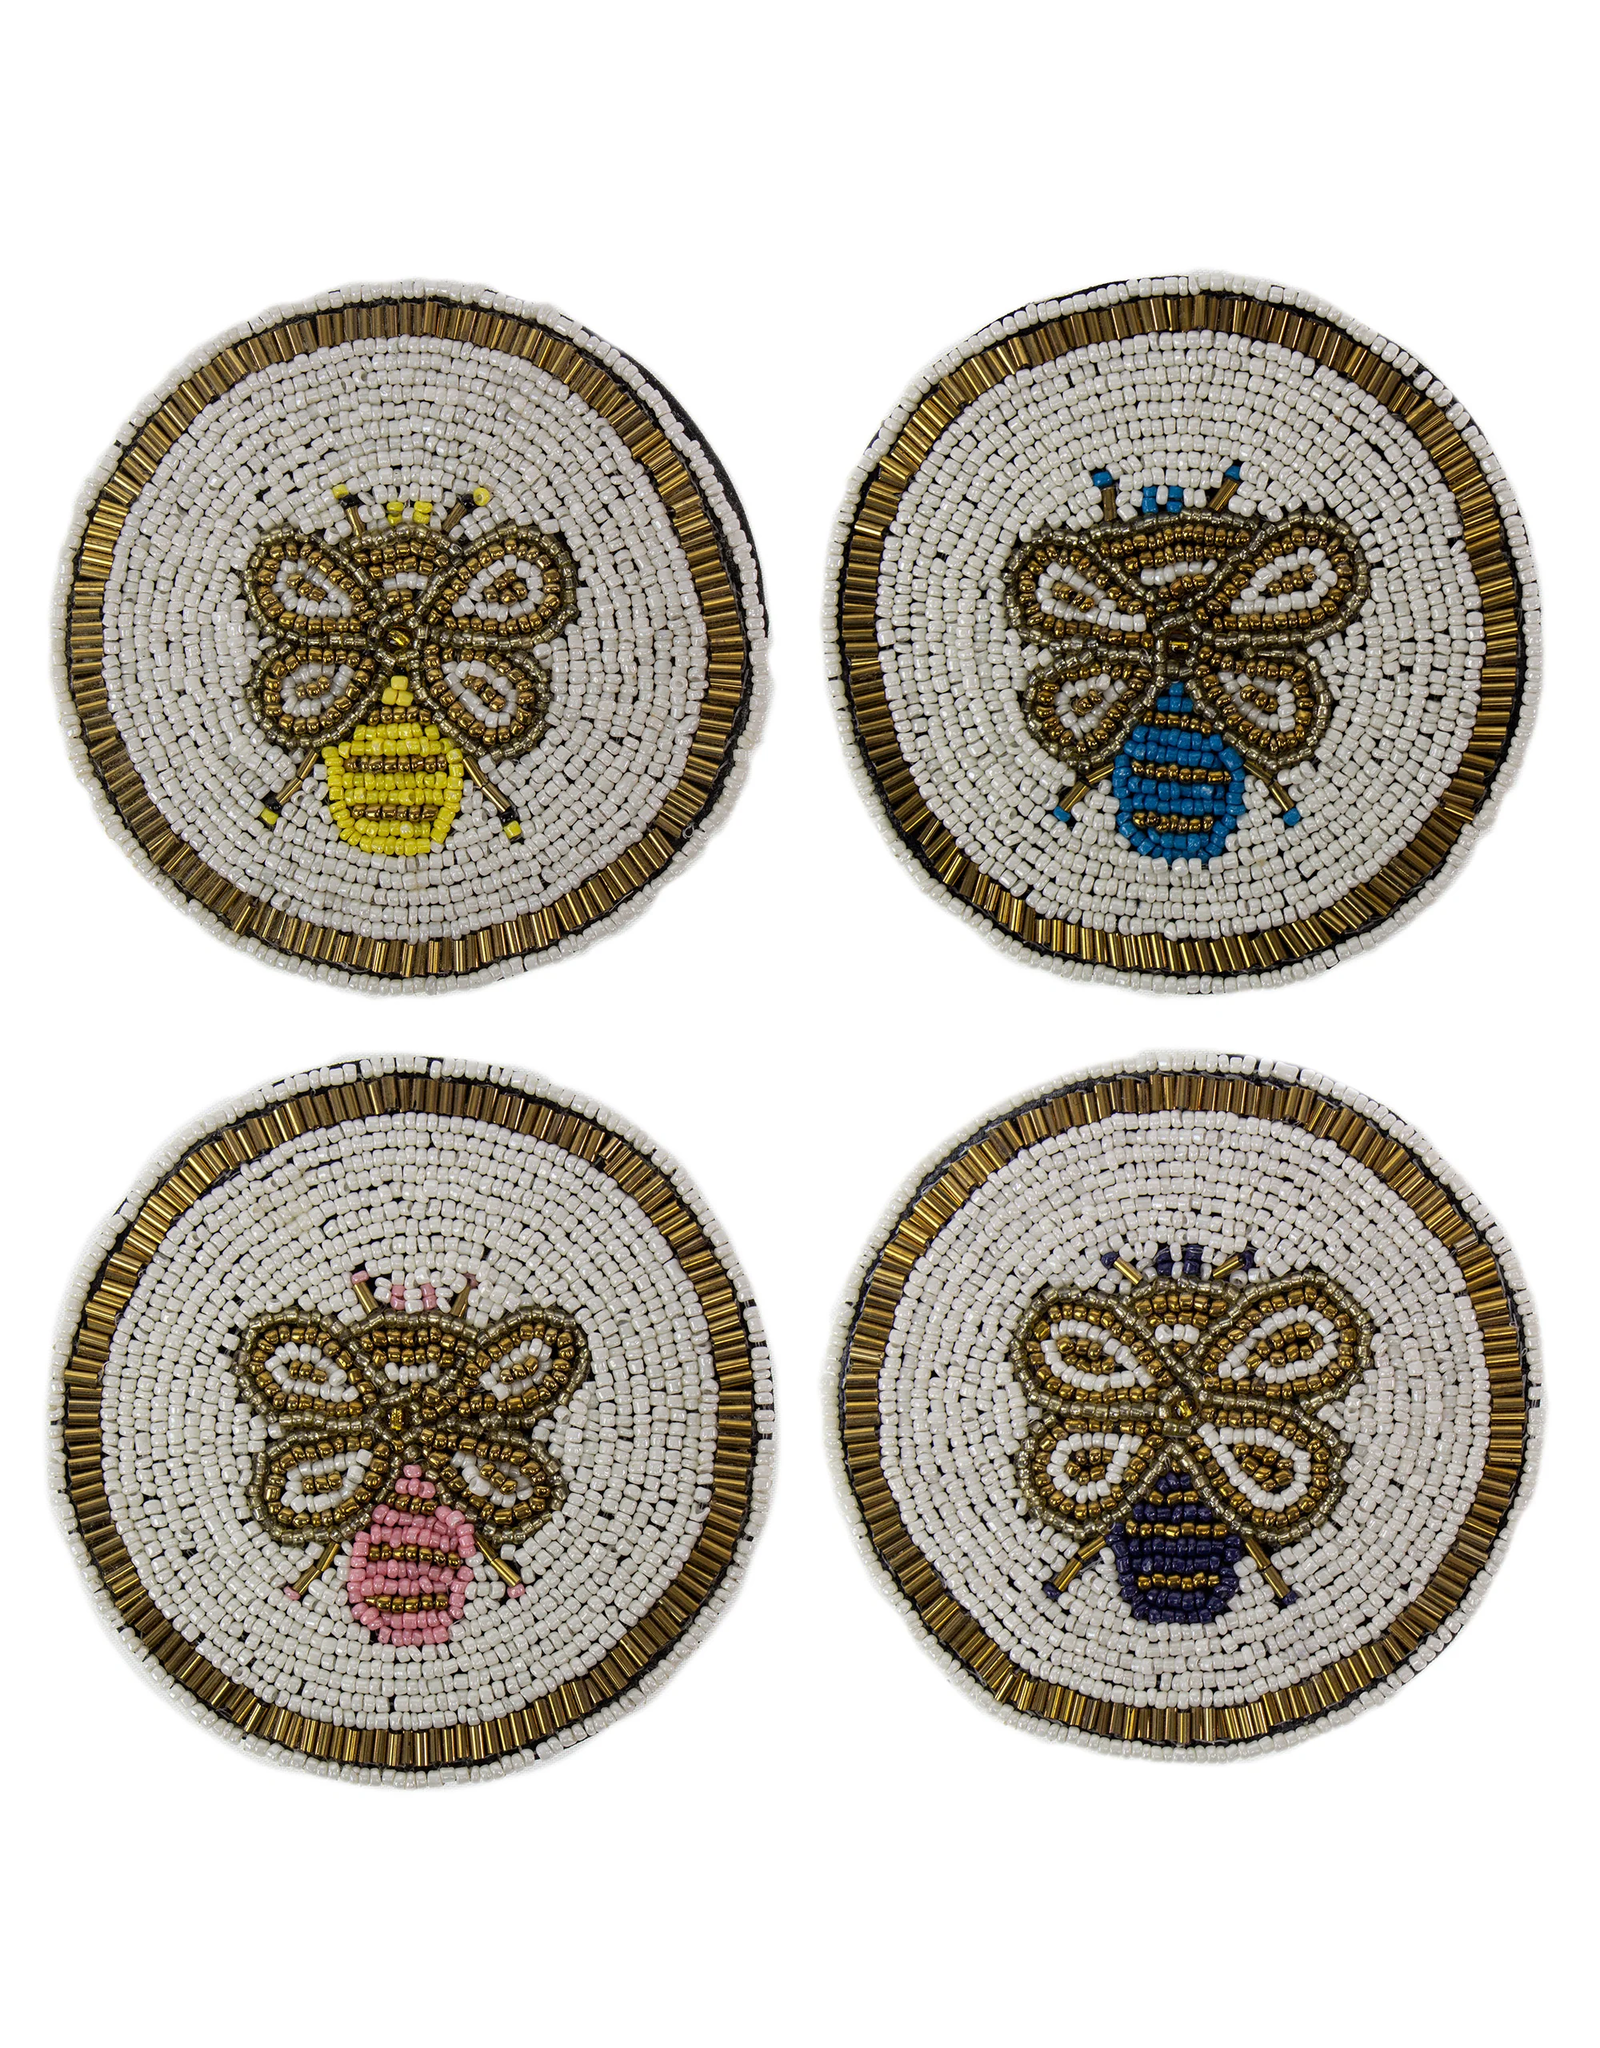 Trade roots Beaded Coasters, Set of 4